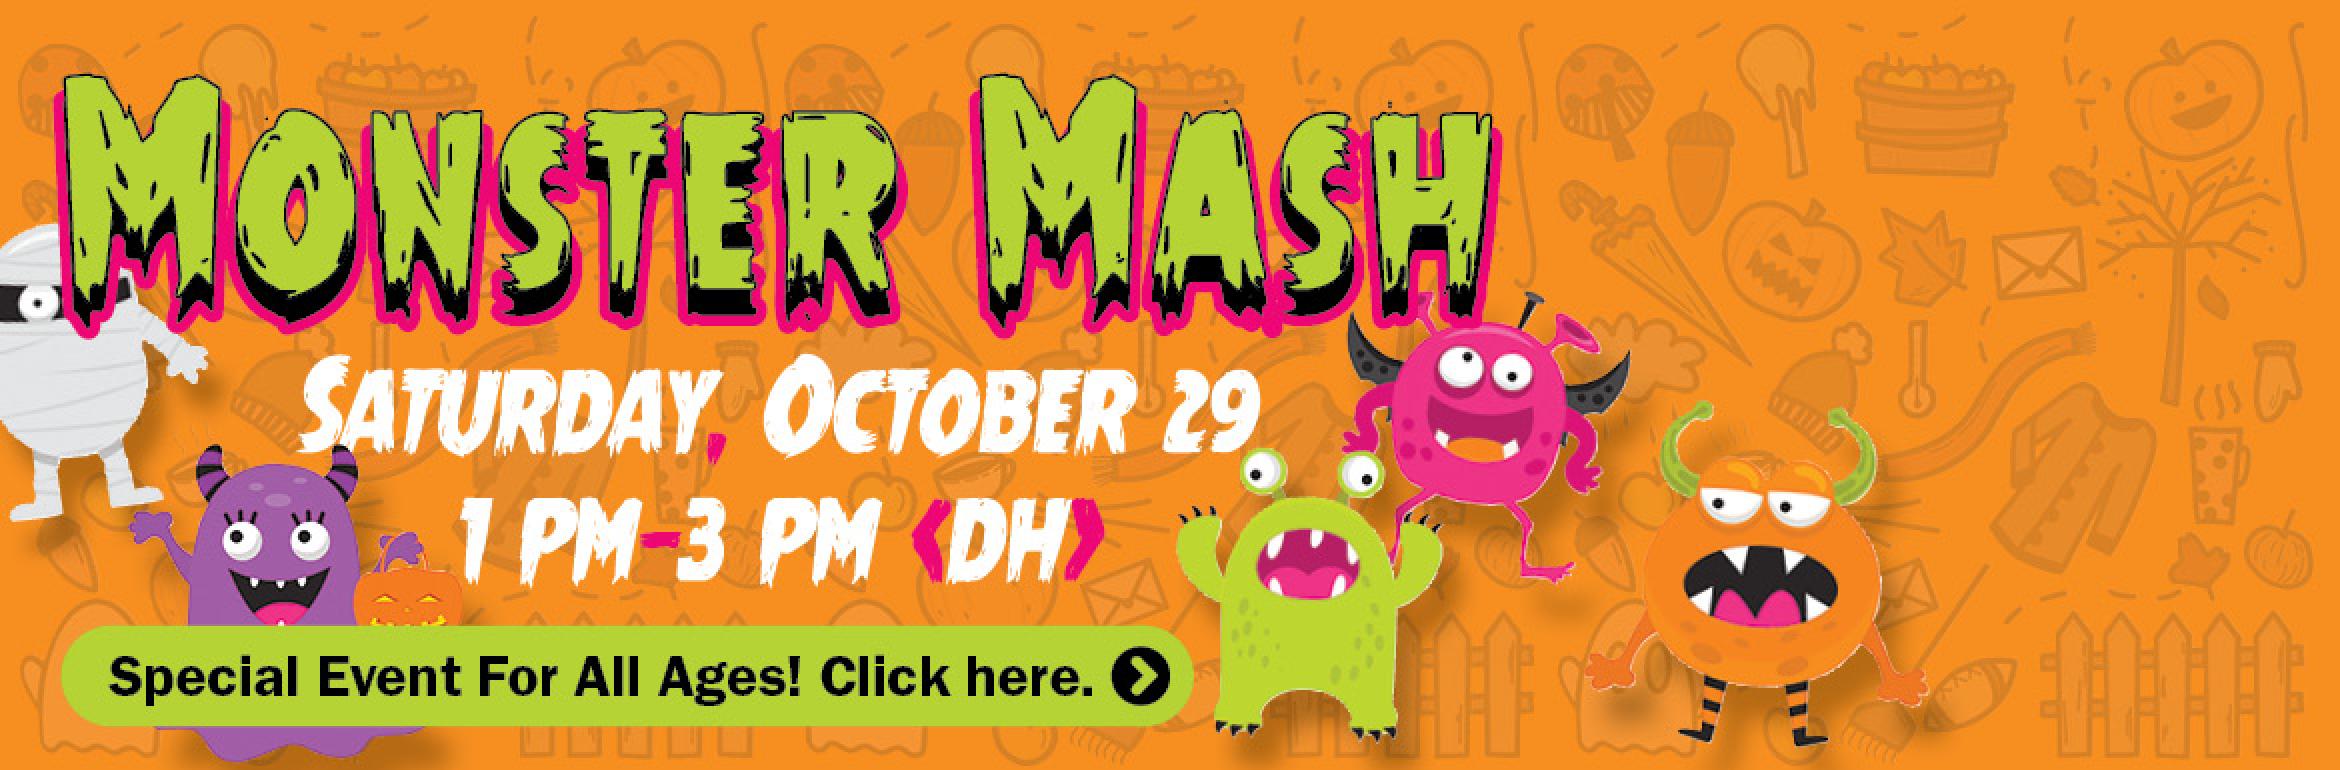 Monster Mash. Saturday, October 29. 1 PM–3 PM (DH). Special Event For All Ages! Click Here.